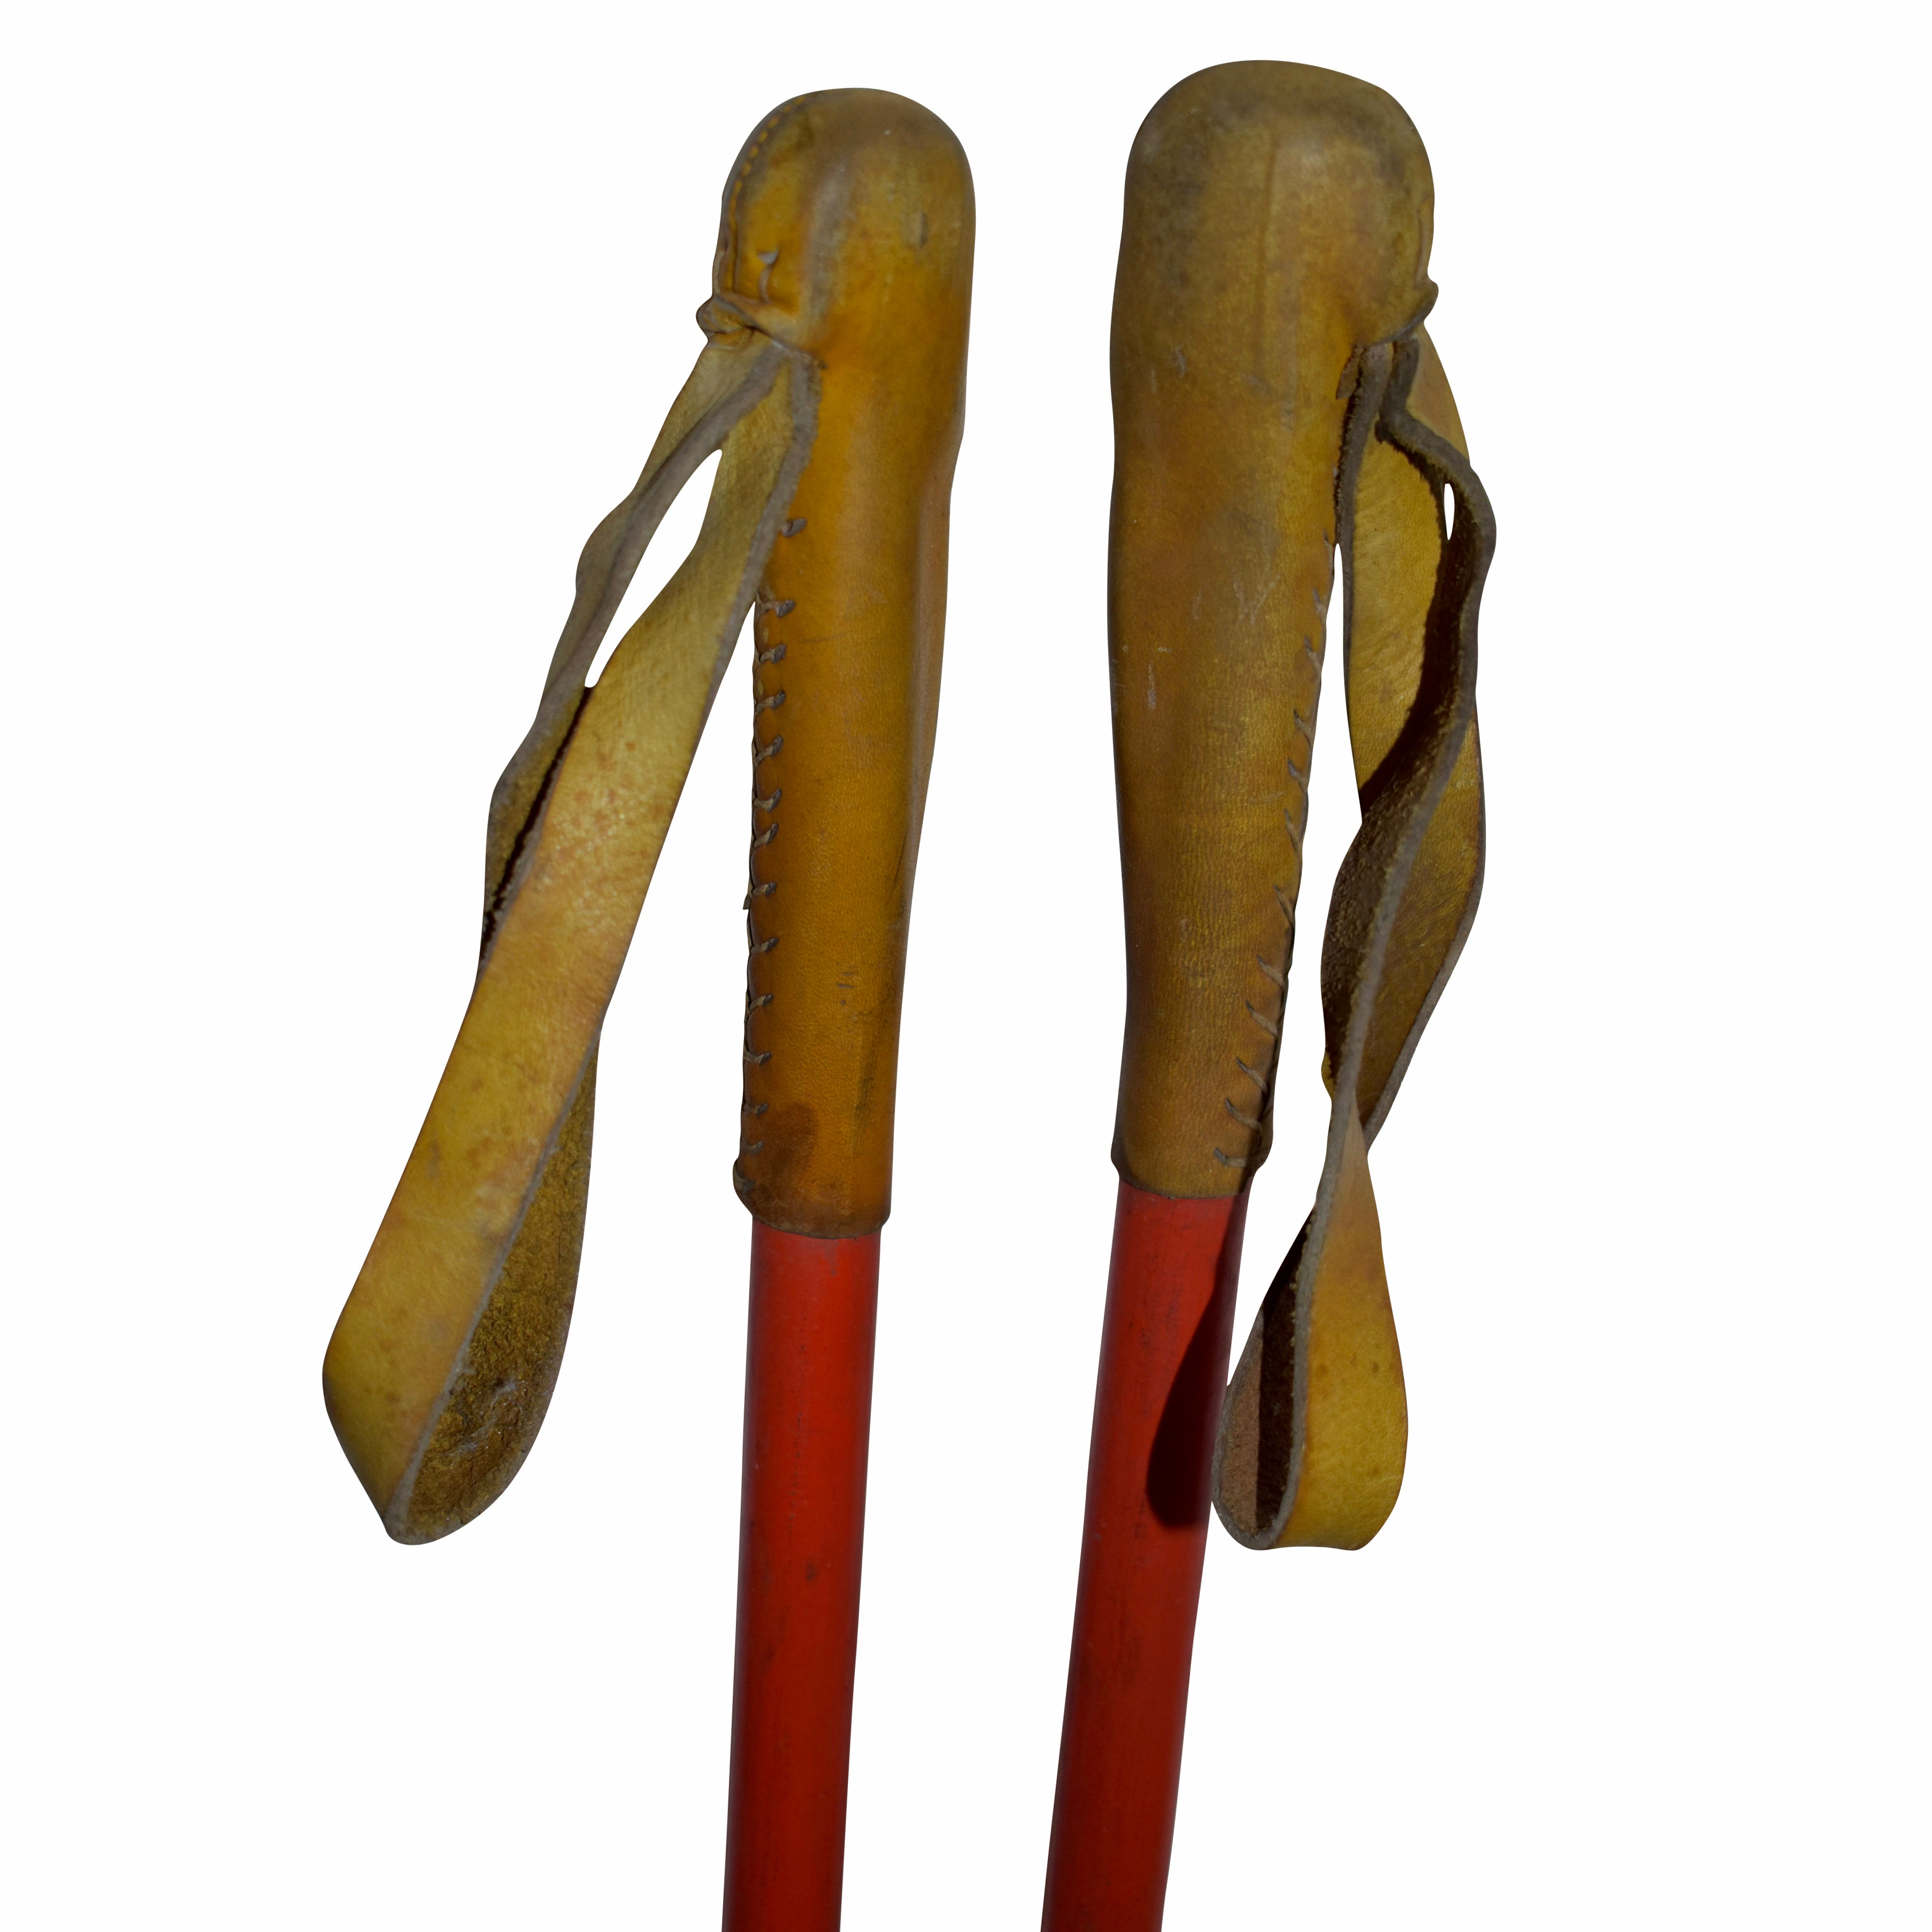 Painted Wooden Ski Poles with Leather Grips